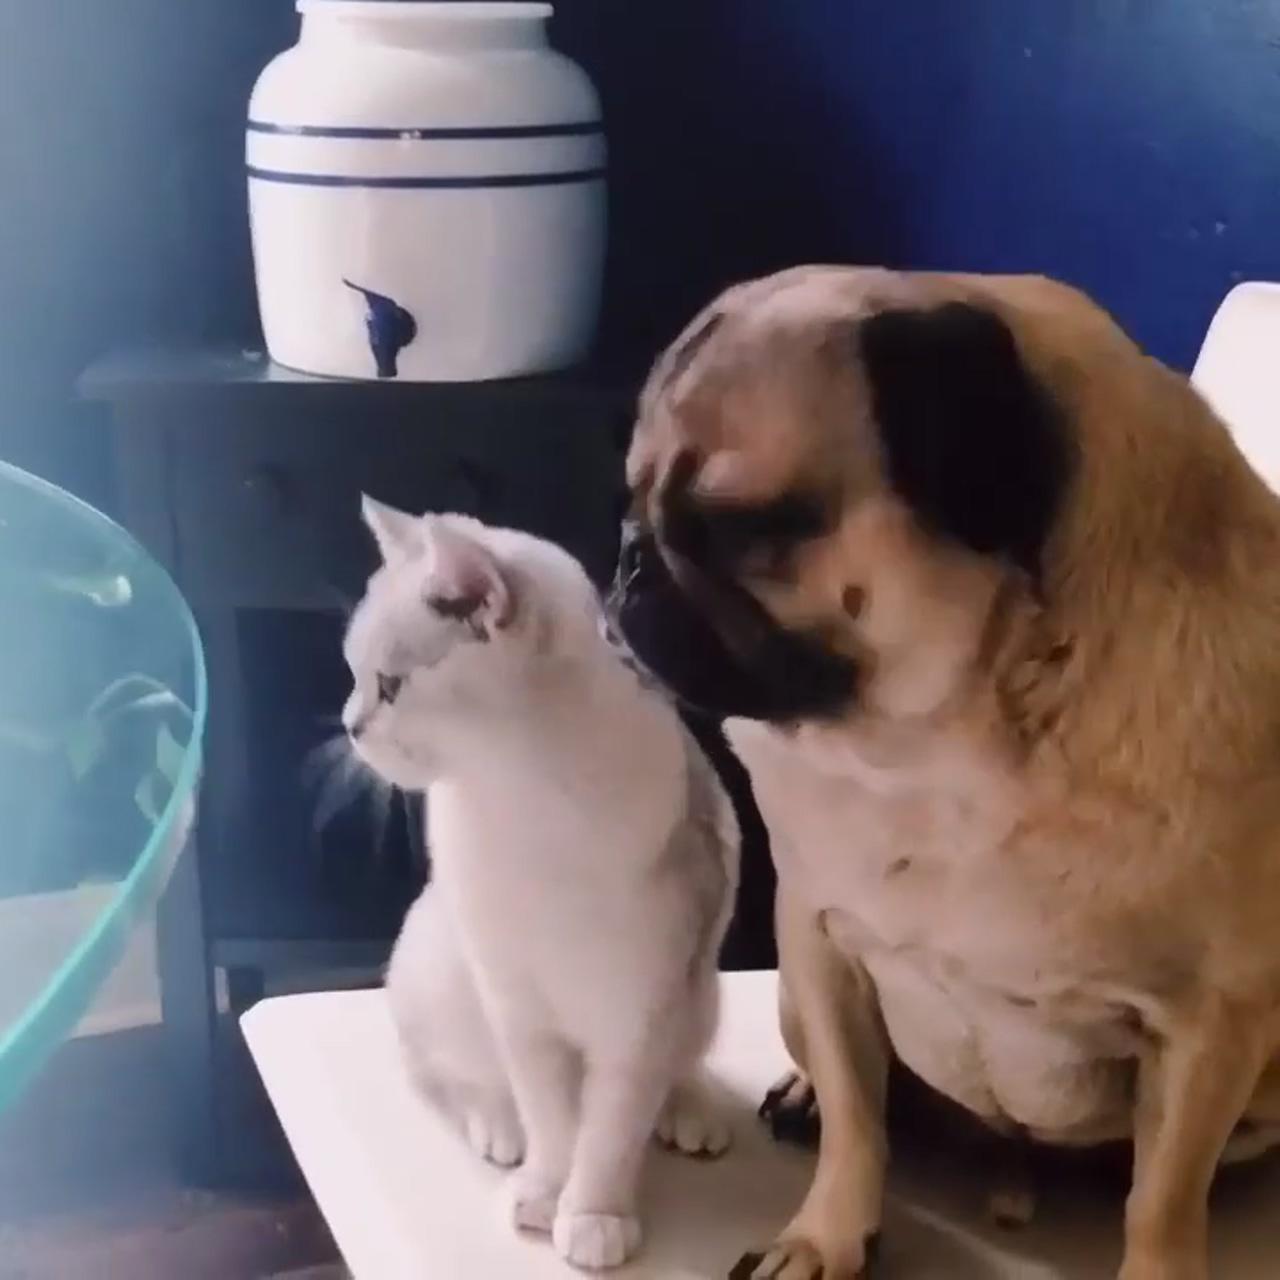 Kitty and doggy buddies just hanging out; jumpscares from mops